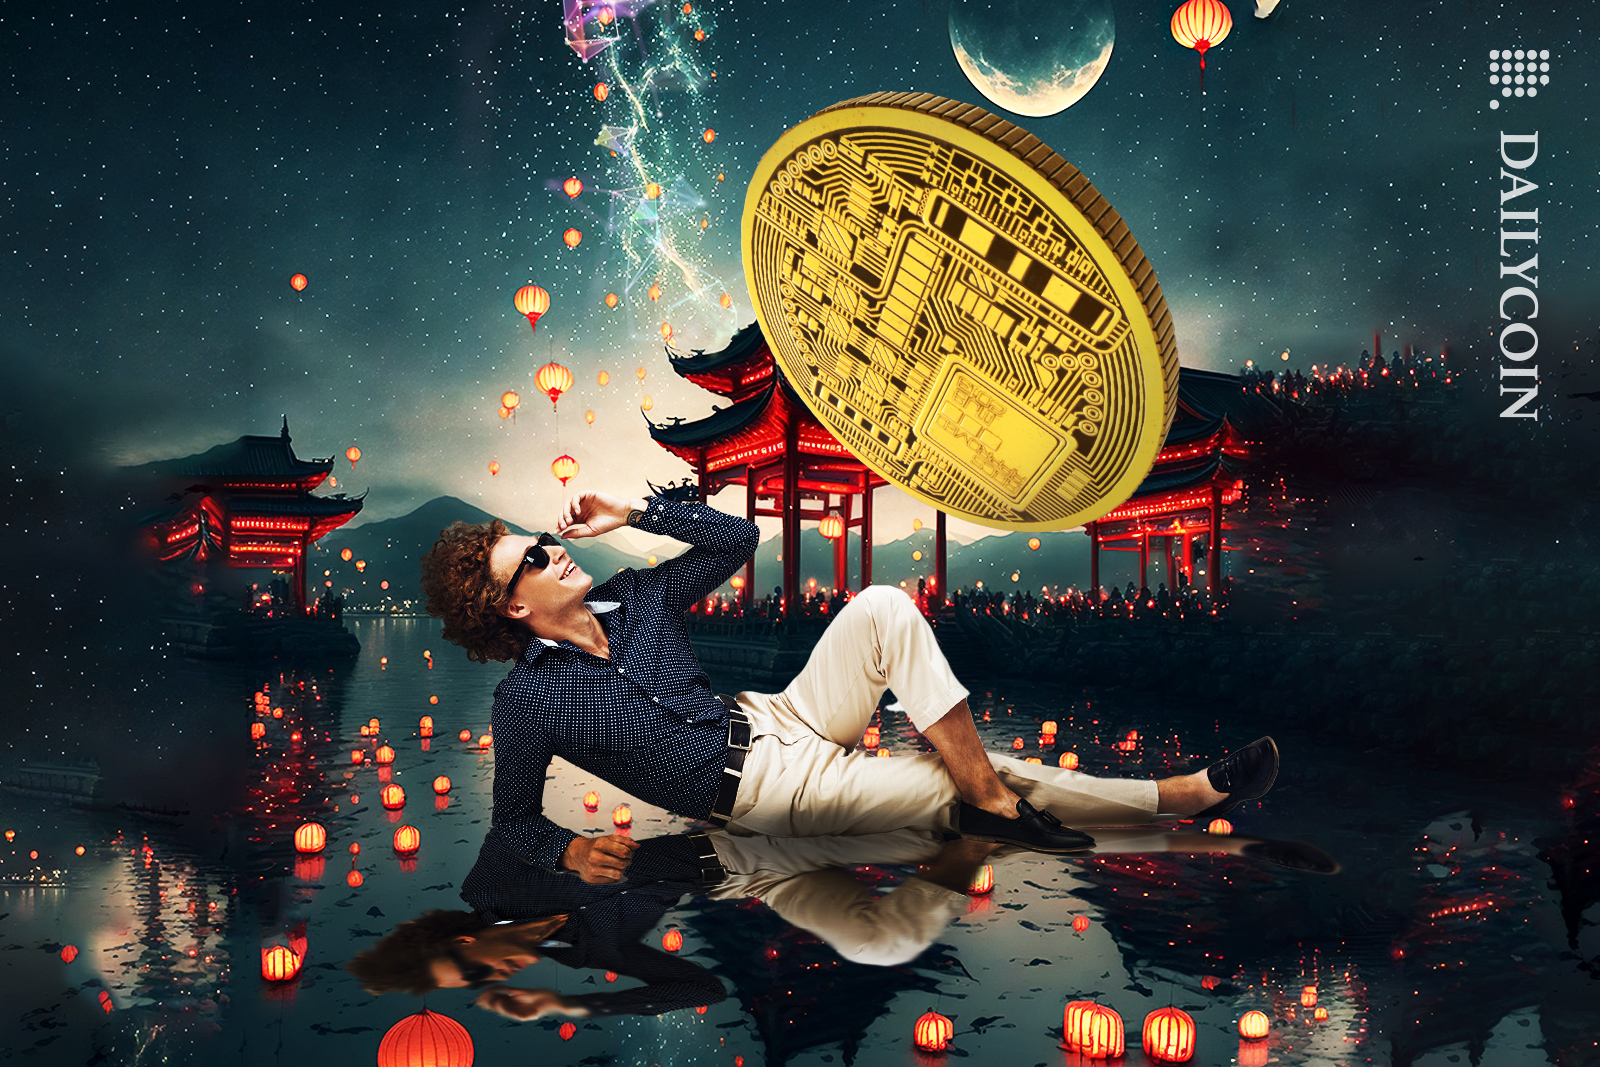 Man in sunglasses surrounded by chinese lanterns looking up to a crypto coin.